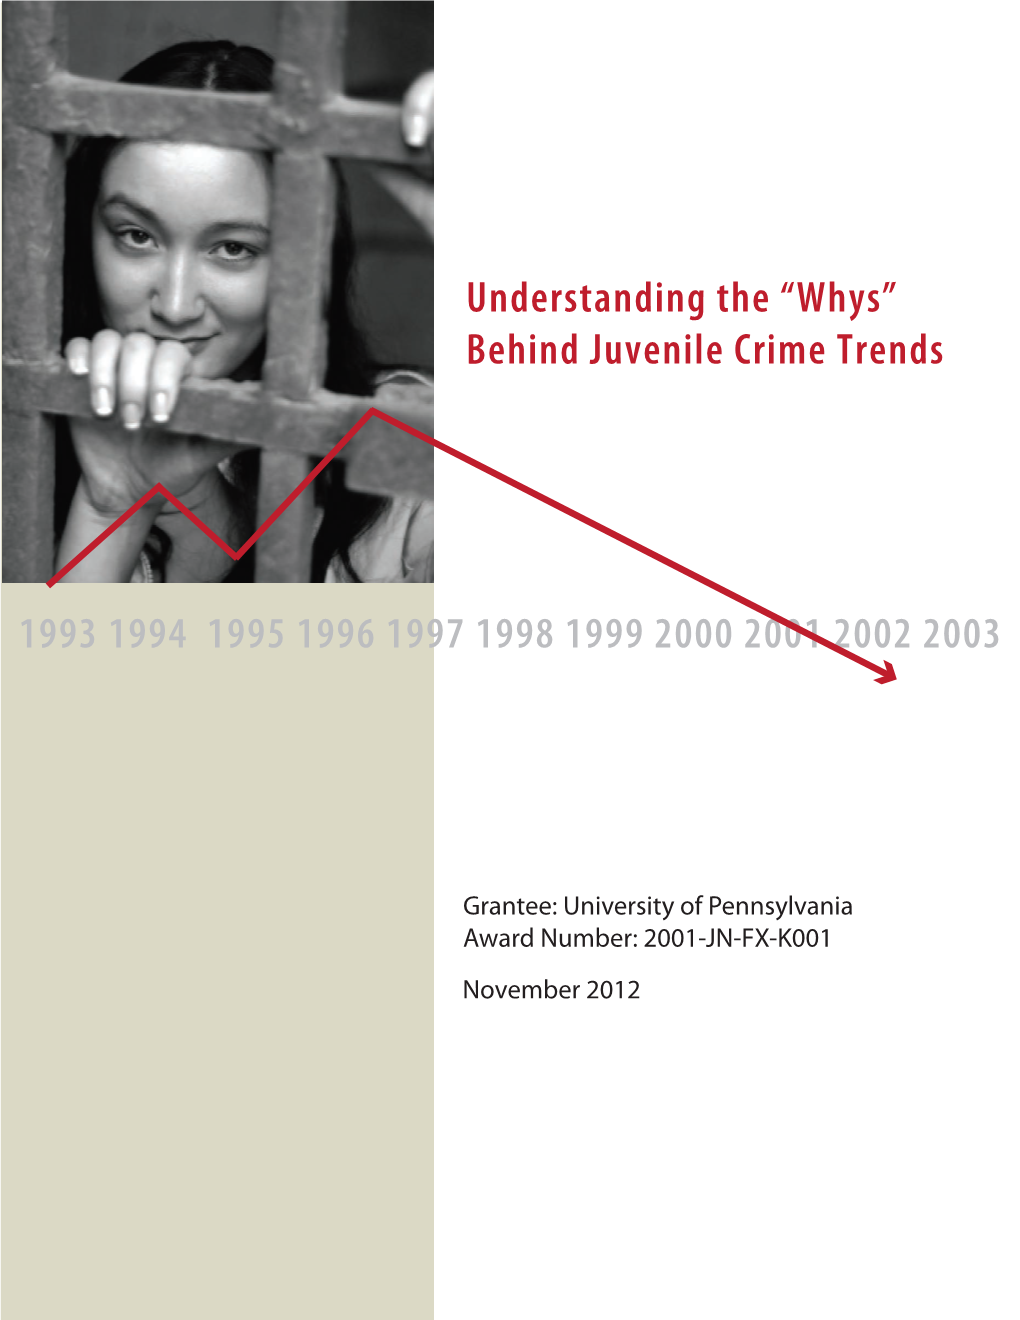 Understanding the “Whys” Behind Juvenile Crime Trends